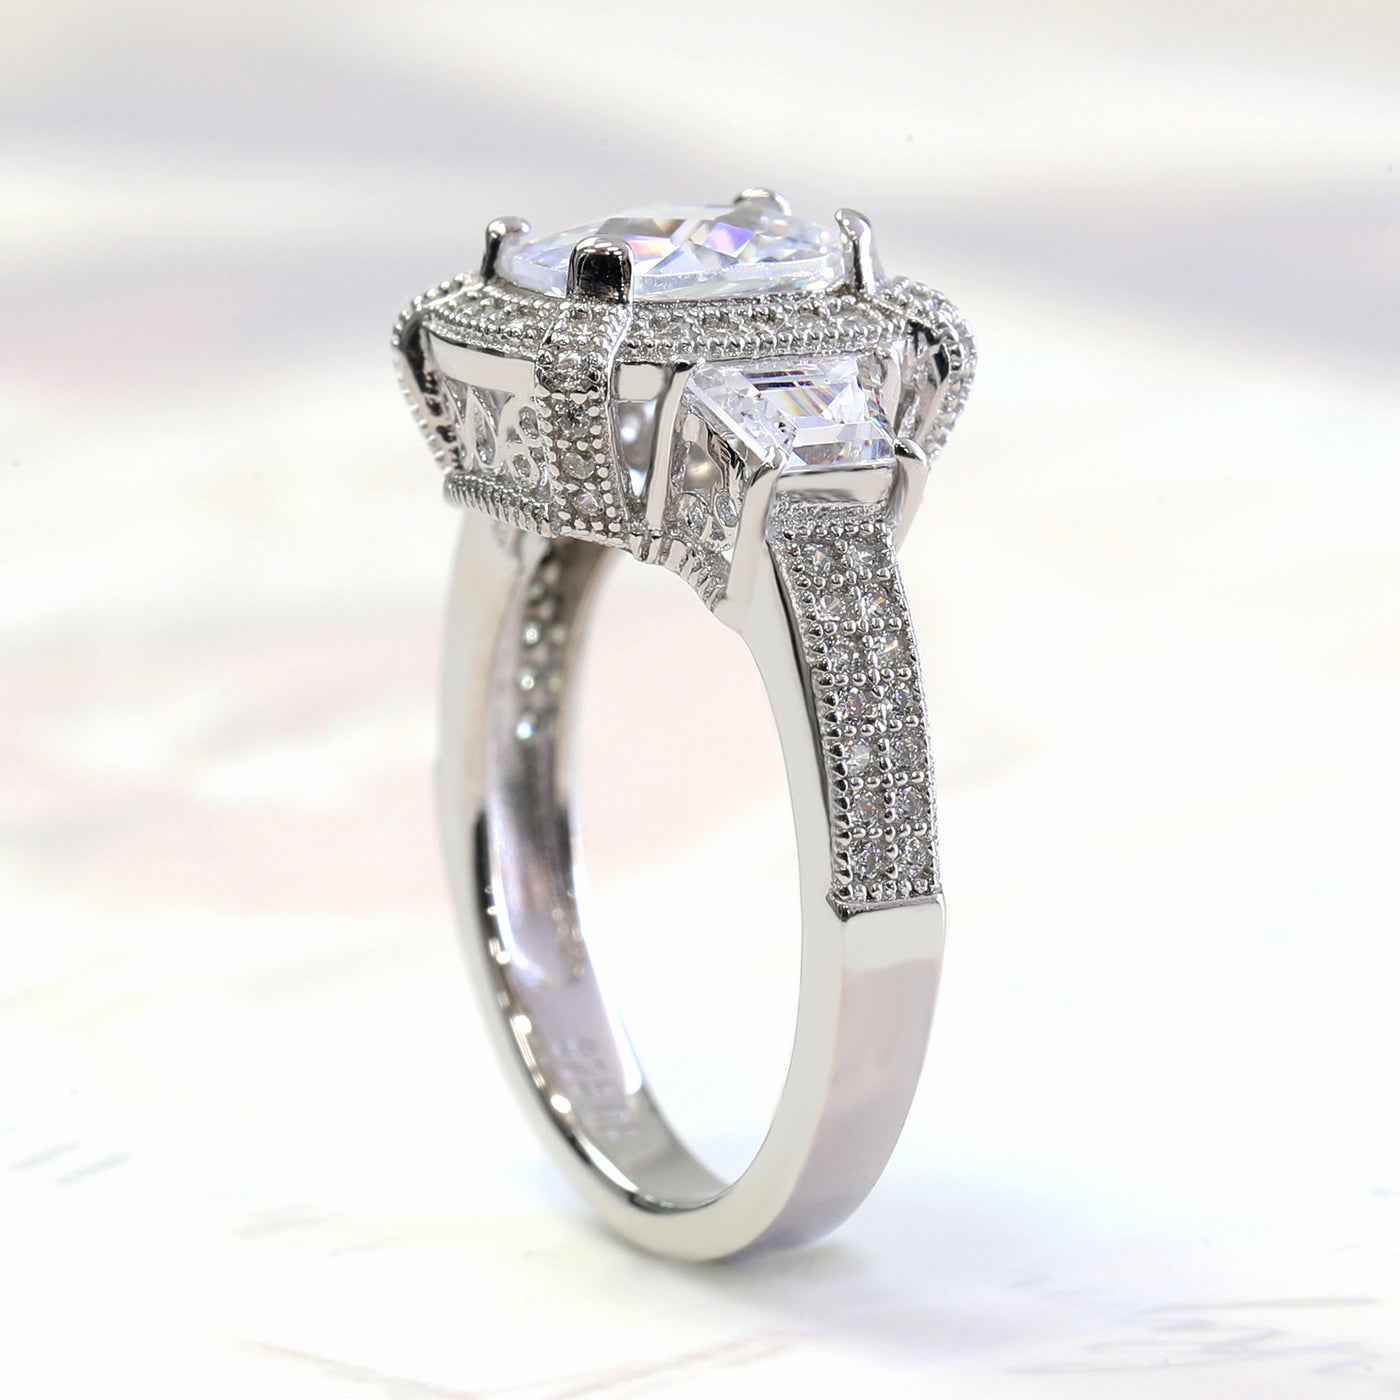 Vintage-Inspired Cushion Cut Engagement Ring